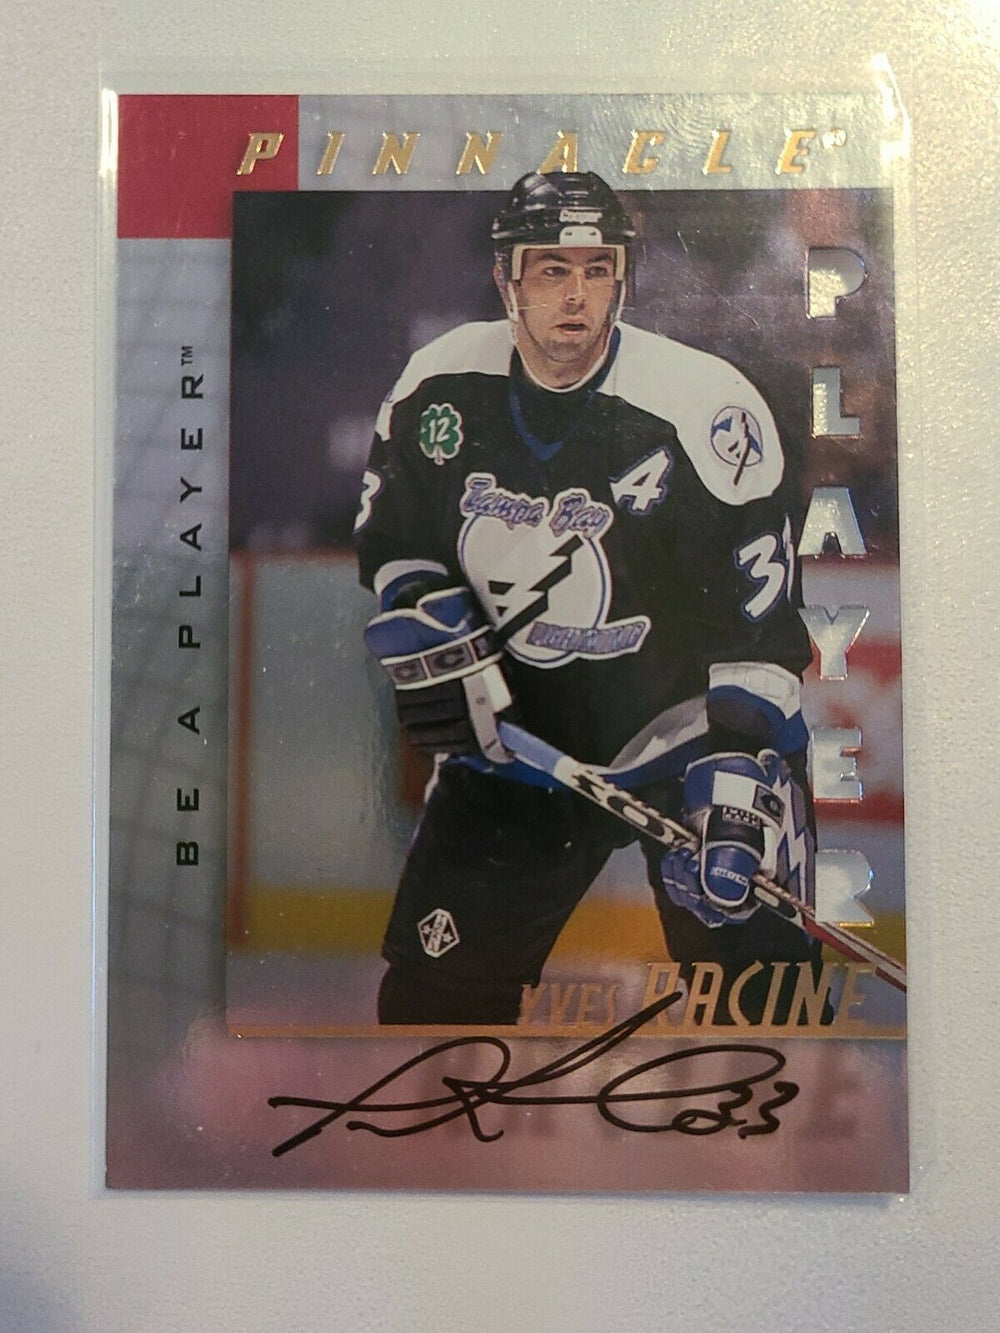 1997-98 Be A Player Autograph Die Cut #27 Yves Racine Tampa Bay Lightning